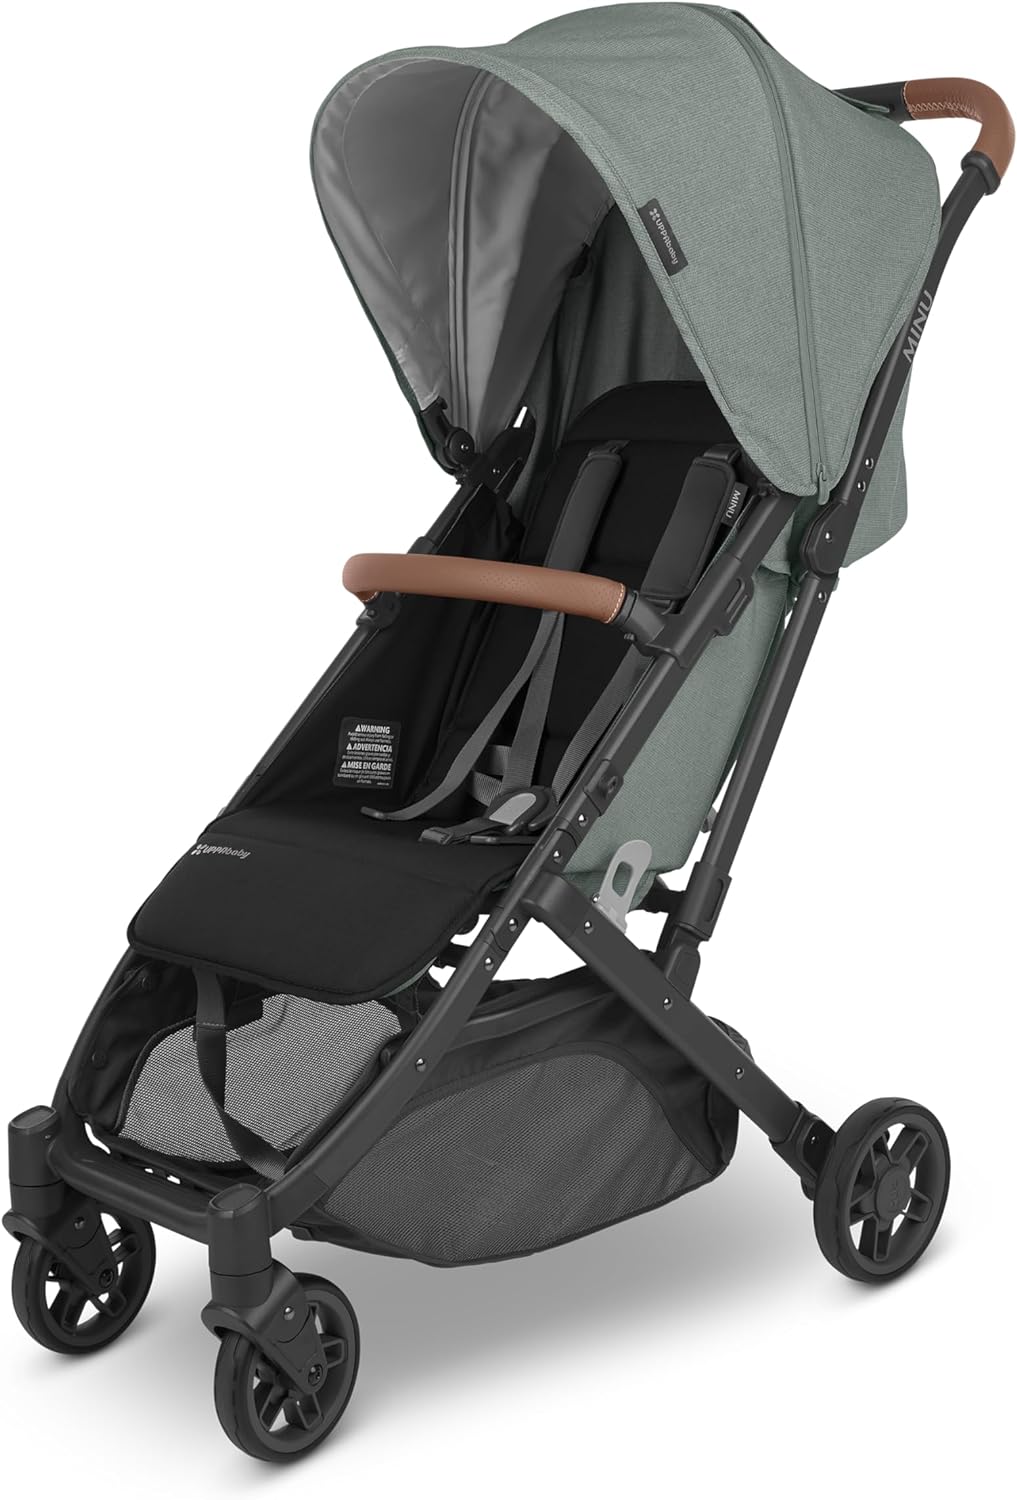 UPPAbaby Minu V2 Travel Stroller Review